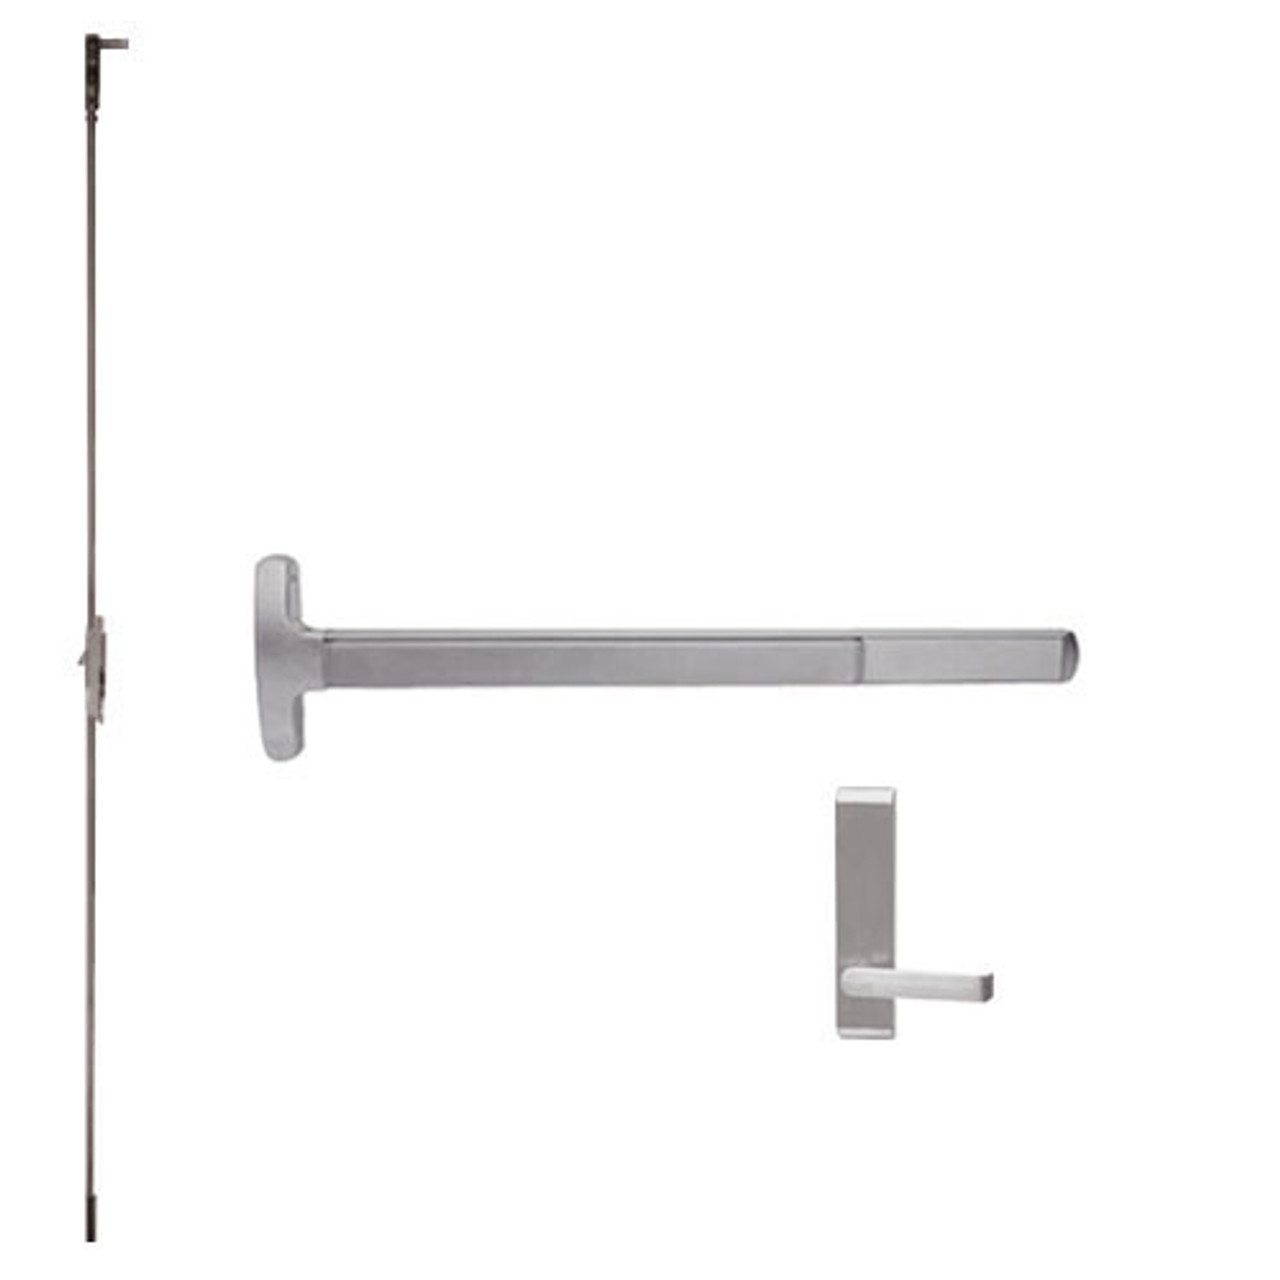 F-24-C-L-DT-DANE-US32D-3-LHR Falcon Exit Device in Satin Stainless Steel